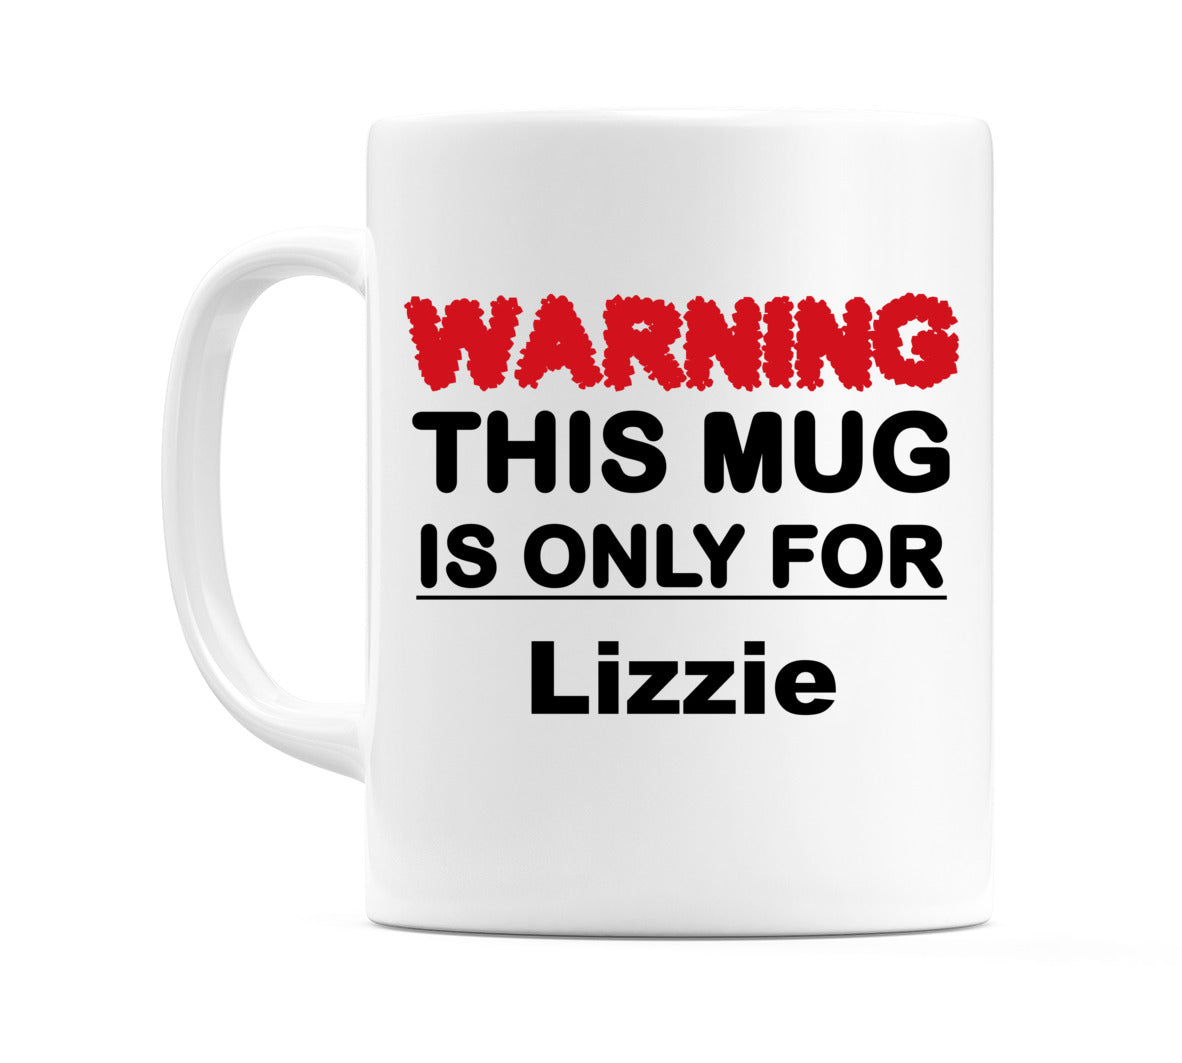 Warning This Mug is ONLY for Lizzie Mug